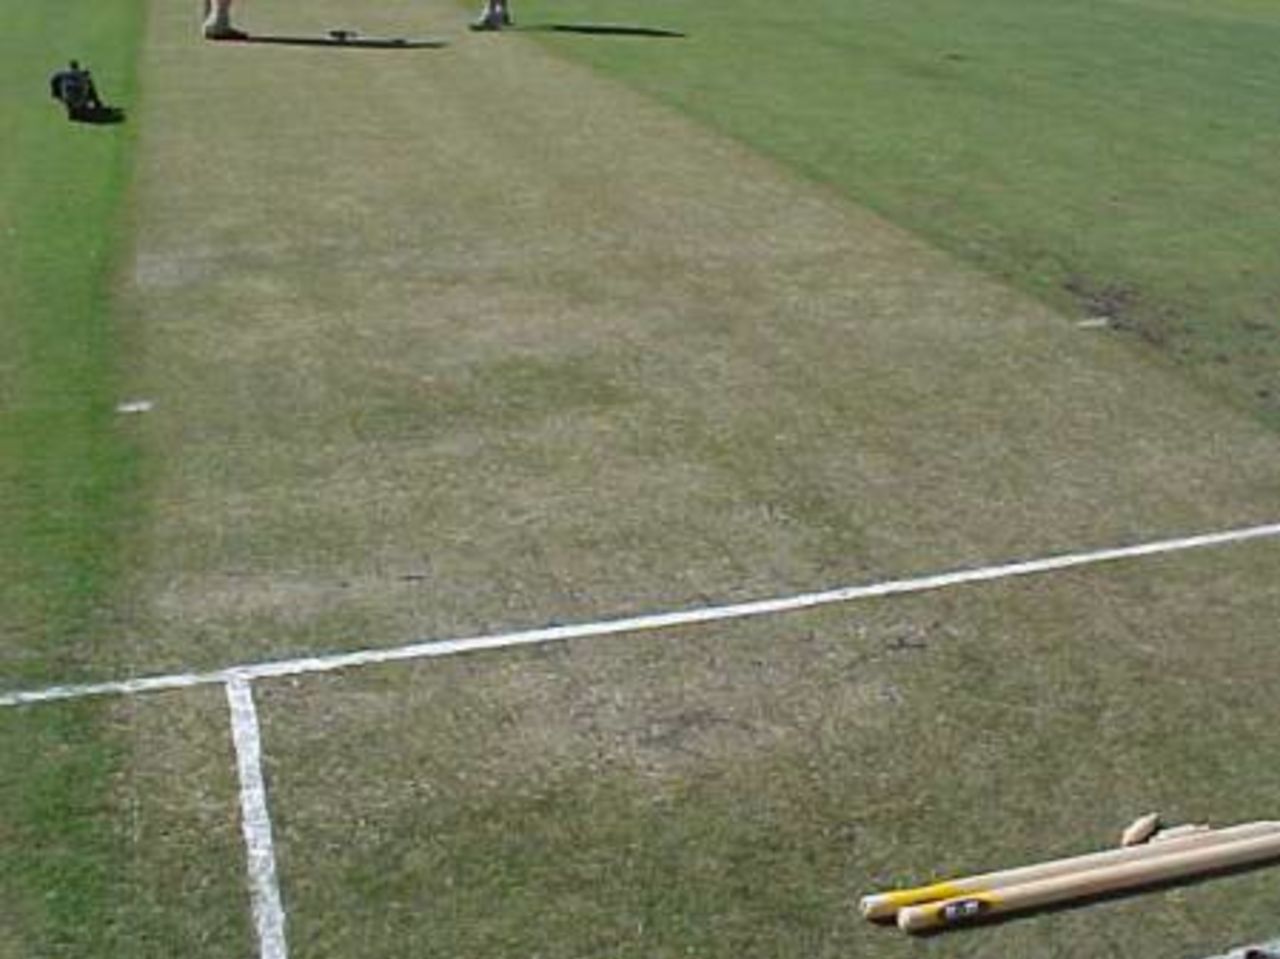 The pitch from the Duckpond End at Port Elizabeth before the start of play on Day 1 of the 2nd Test, New Zealand v South Africa, 30th November 2000